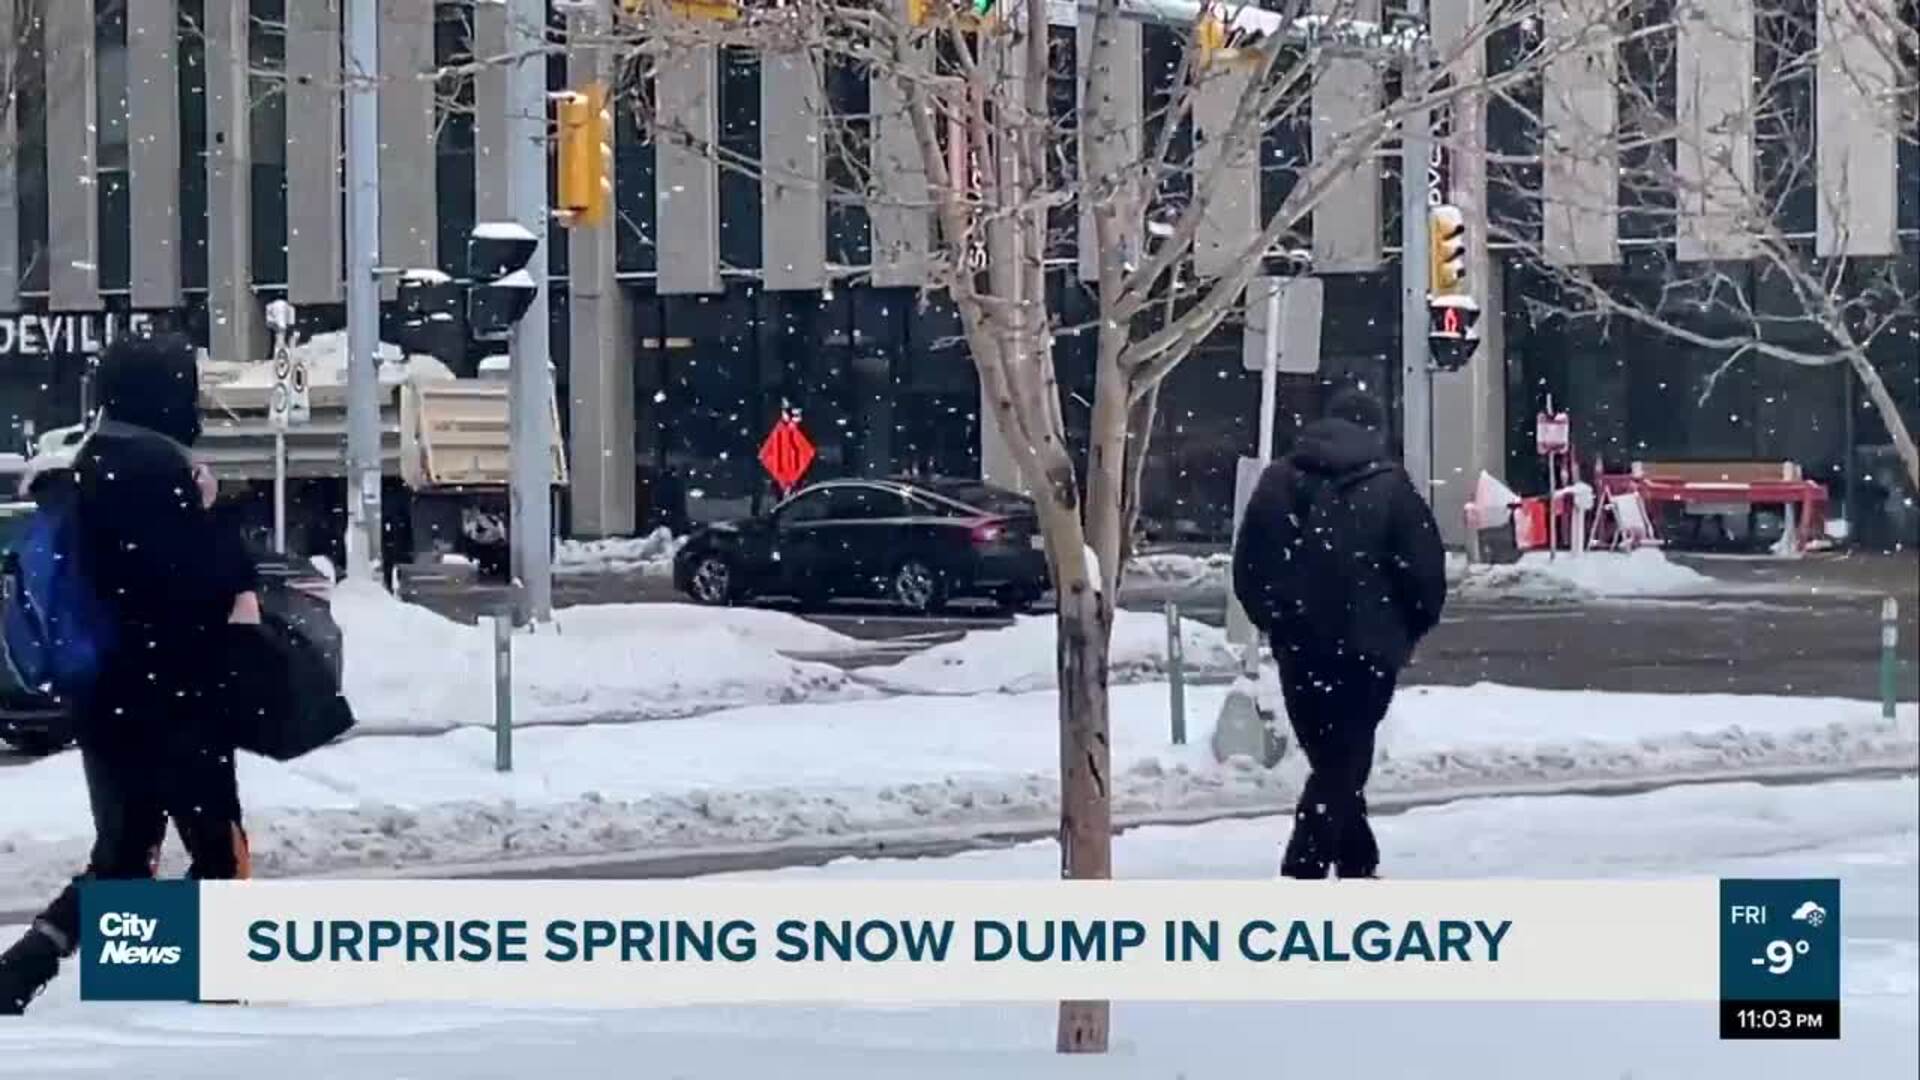 How are Calgarians coping with all this spring snow